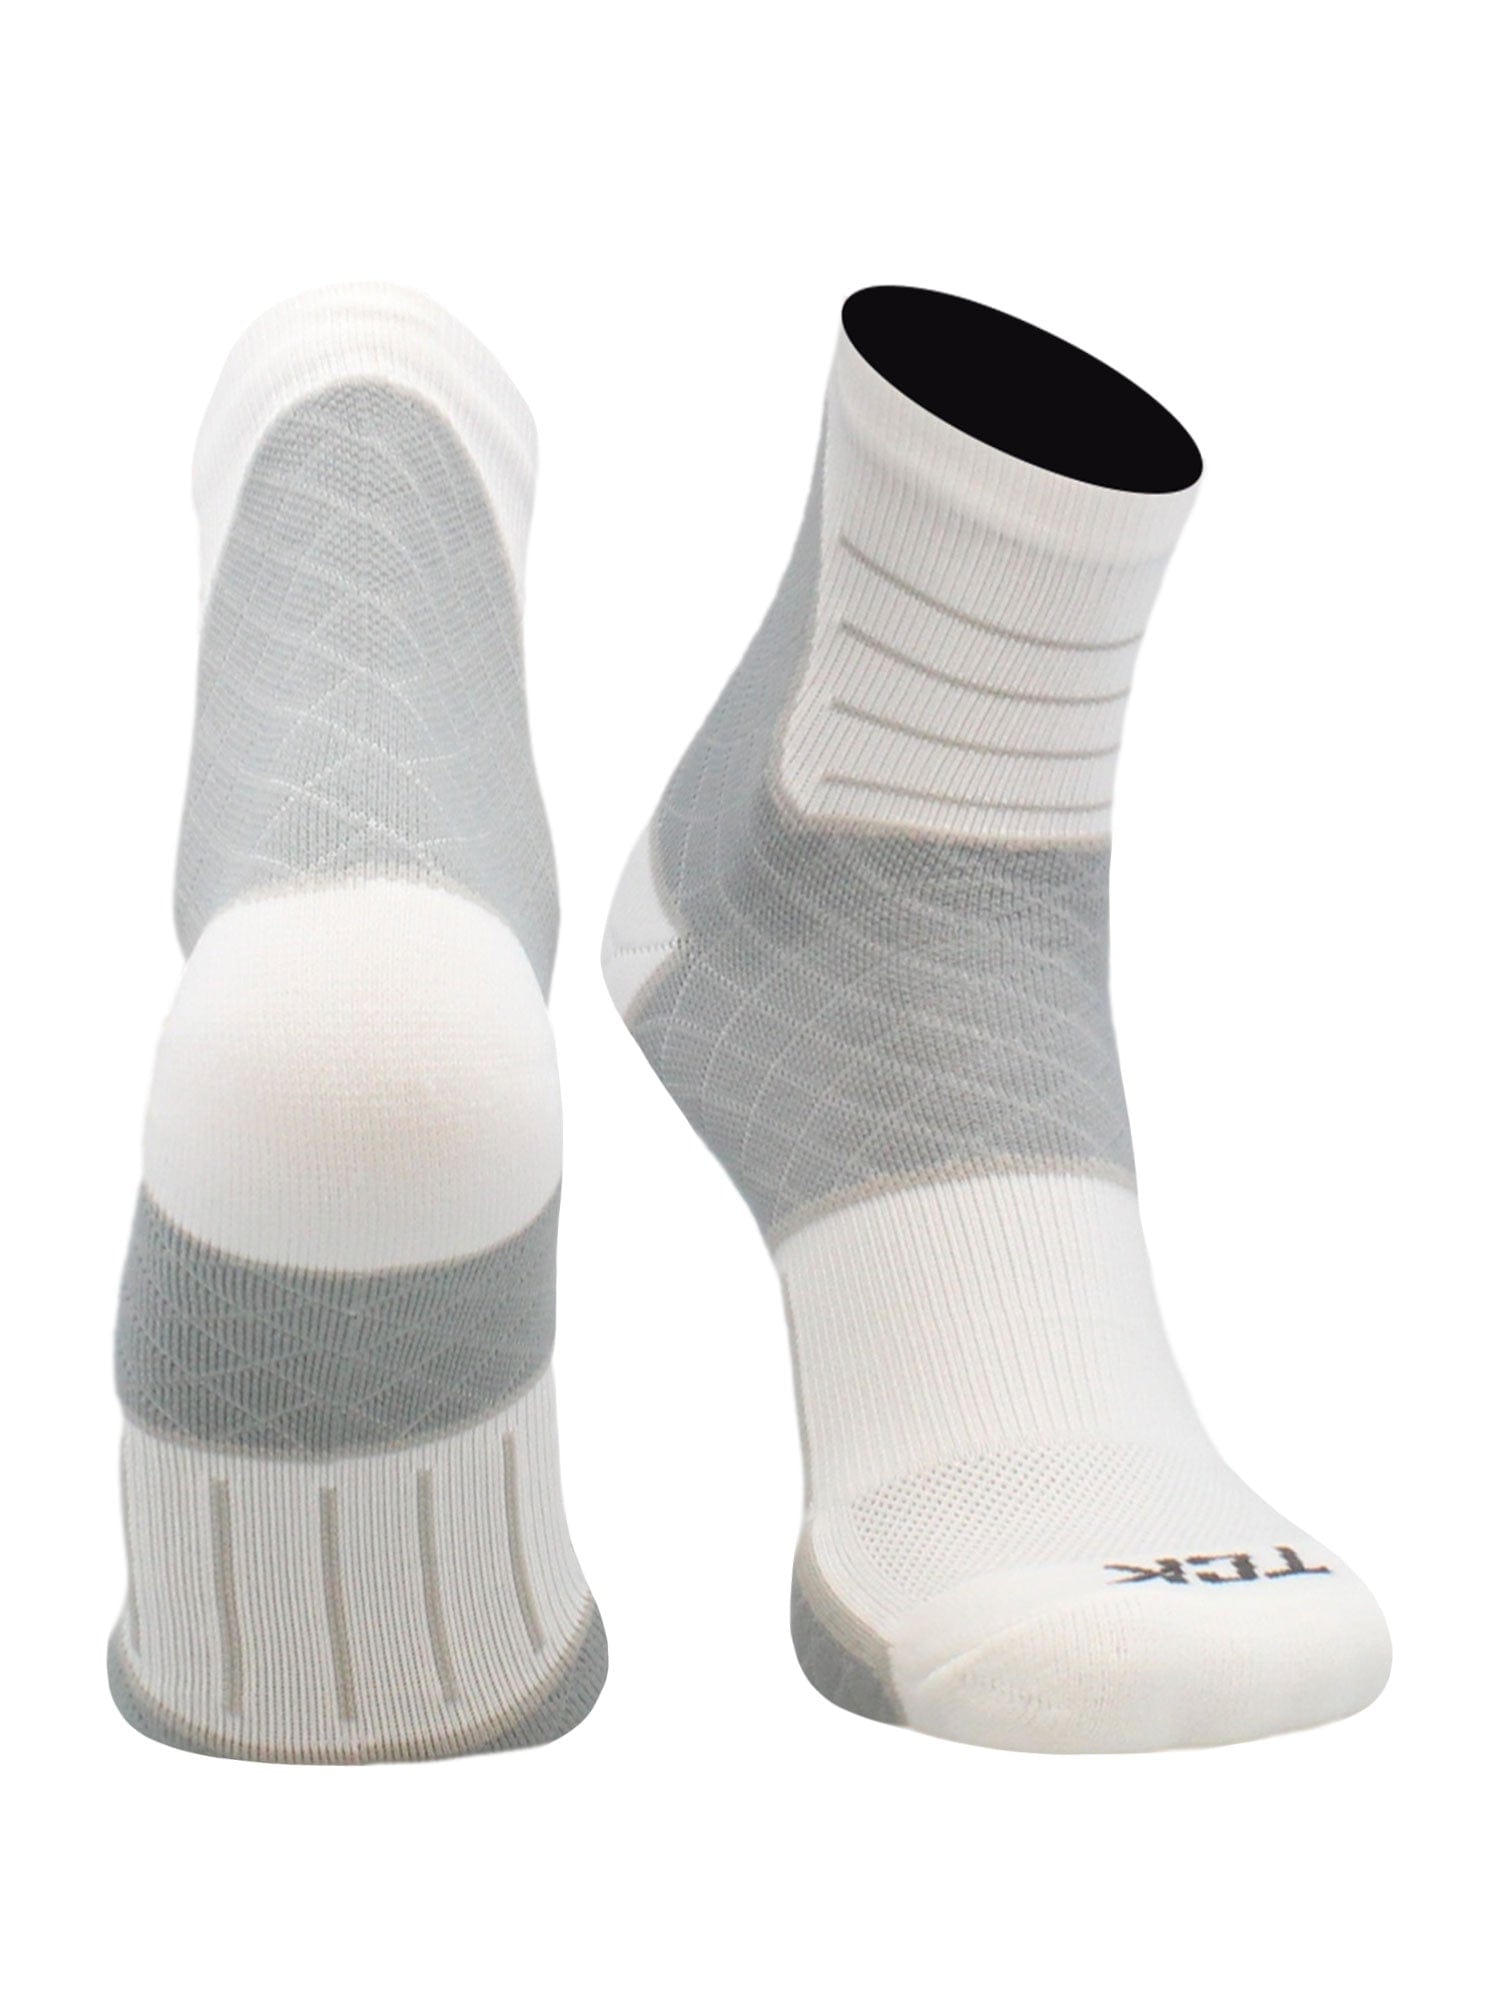 TCK White / Large Achilles Tendonitis Compression Socks For Women and Men, Low Crew 20-30mmHg Compression